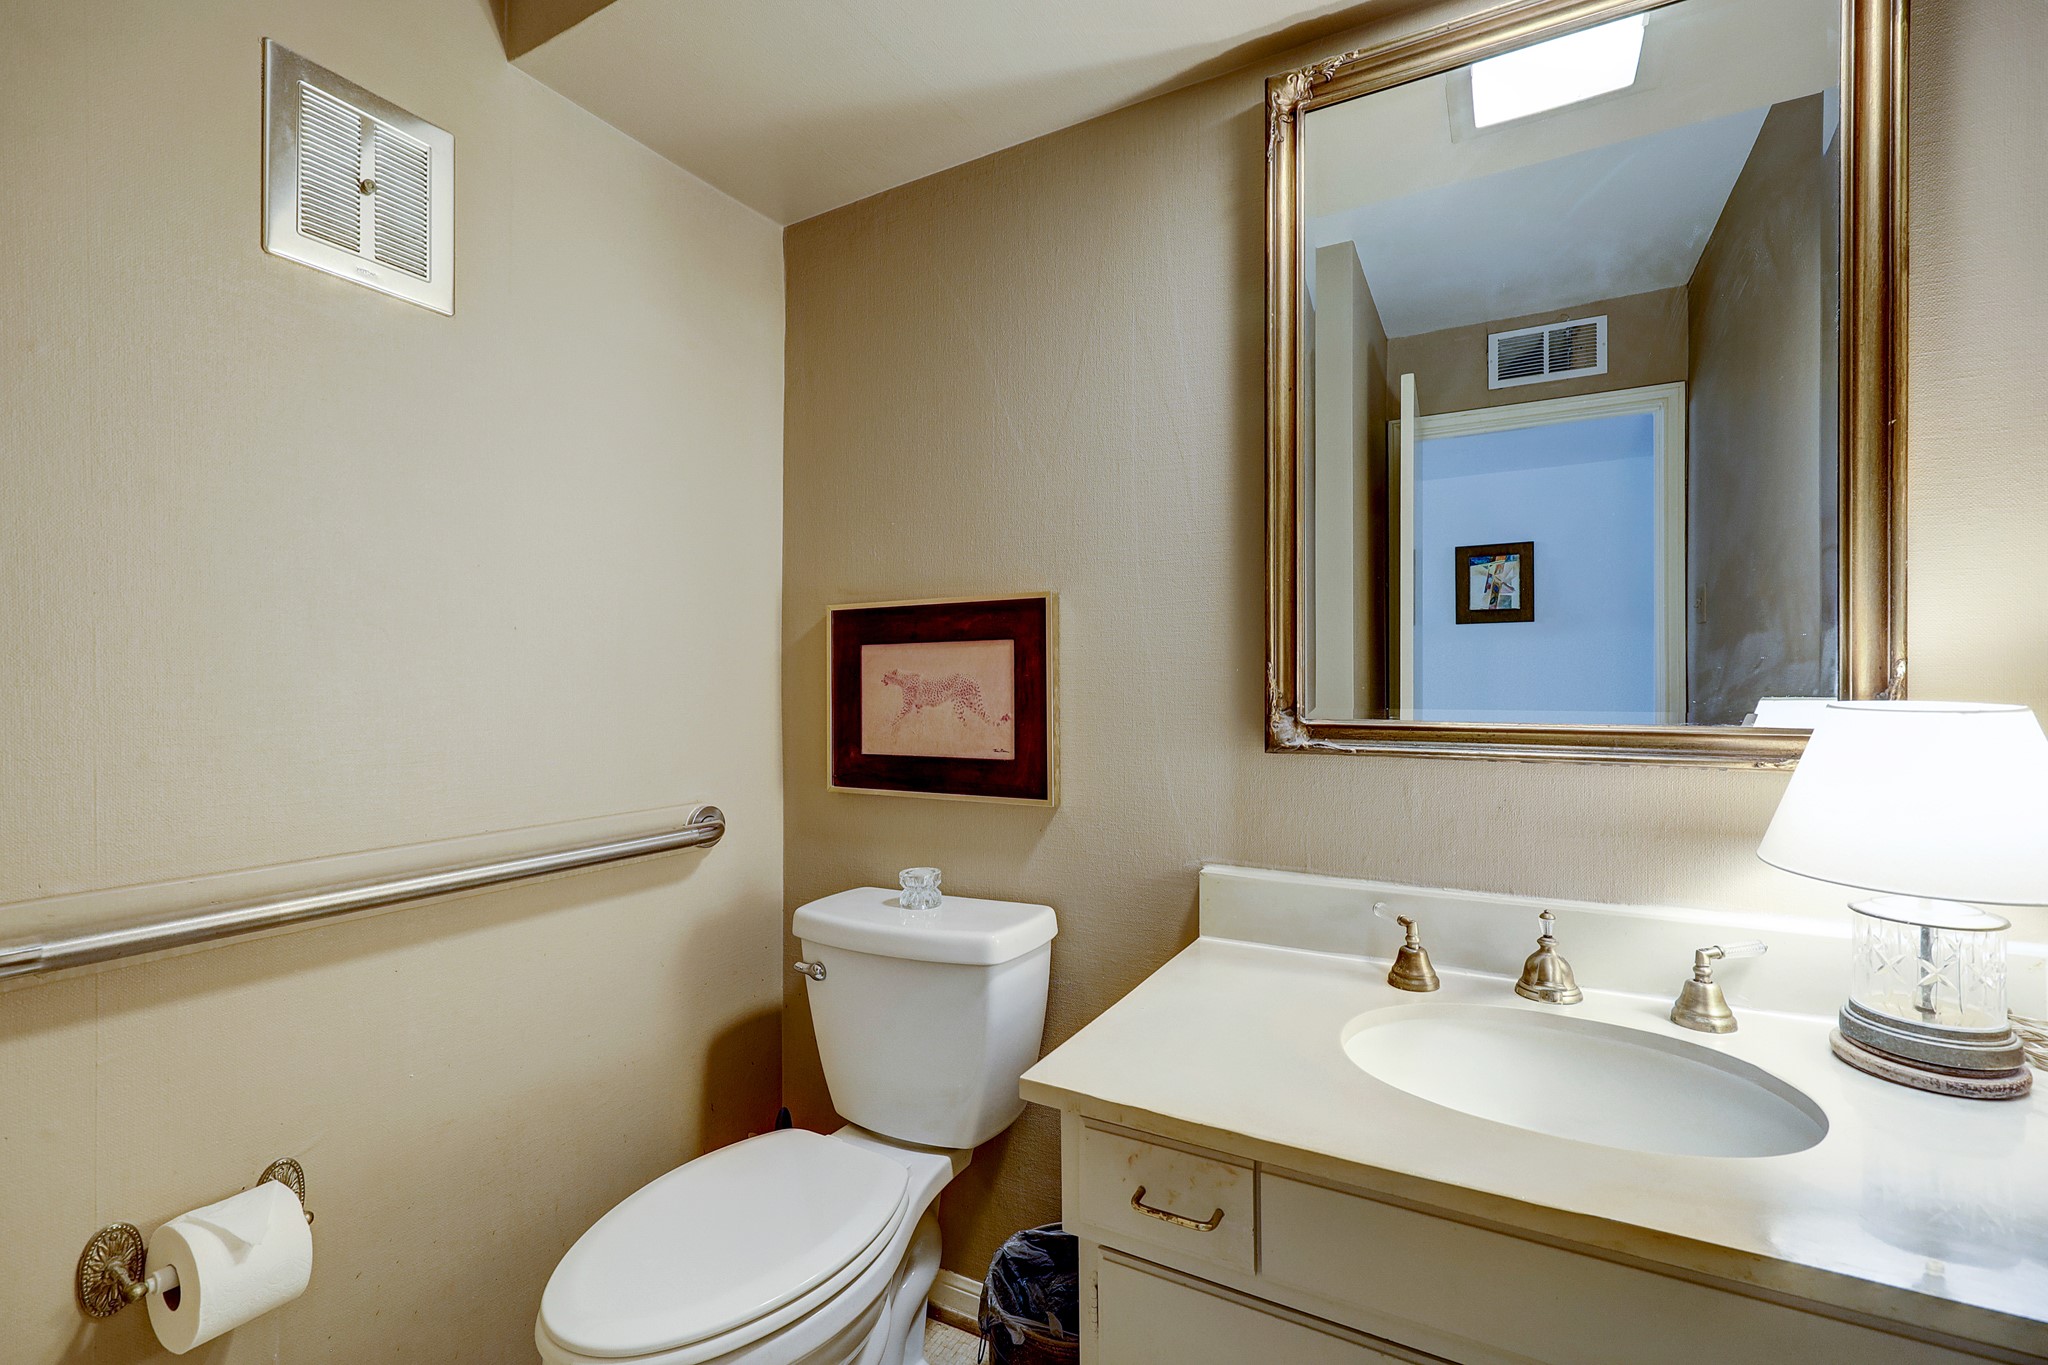 The downstairs half bath is conveniently located near the dining room and kitchen for easy access. In the downstairs hallway, there is an abundance of storage, including an elevator capable closet. The utility room is also featured downstairs as well.